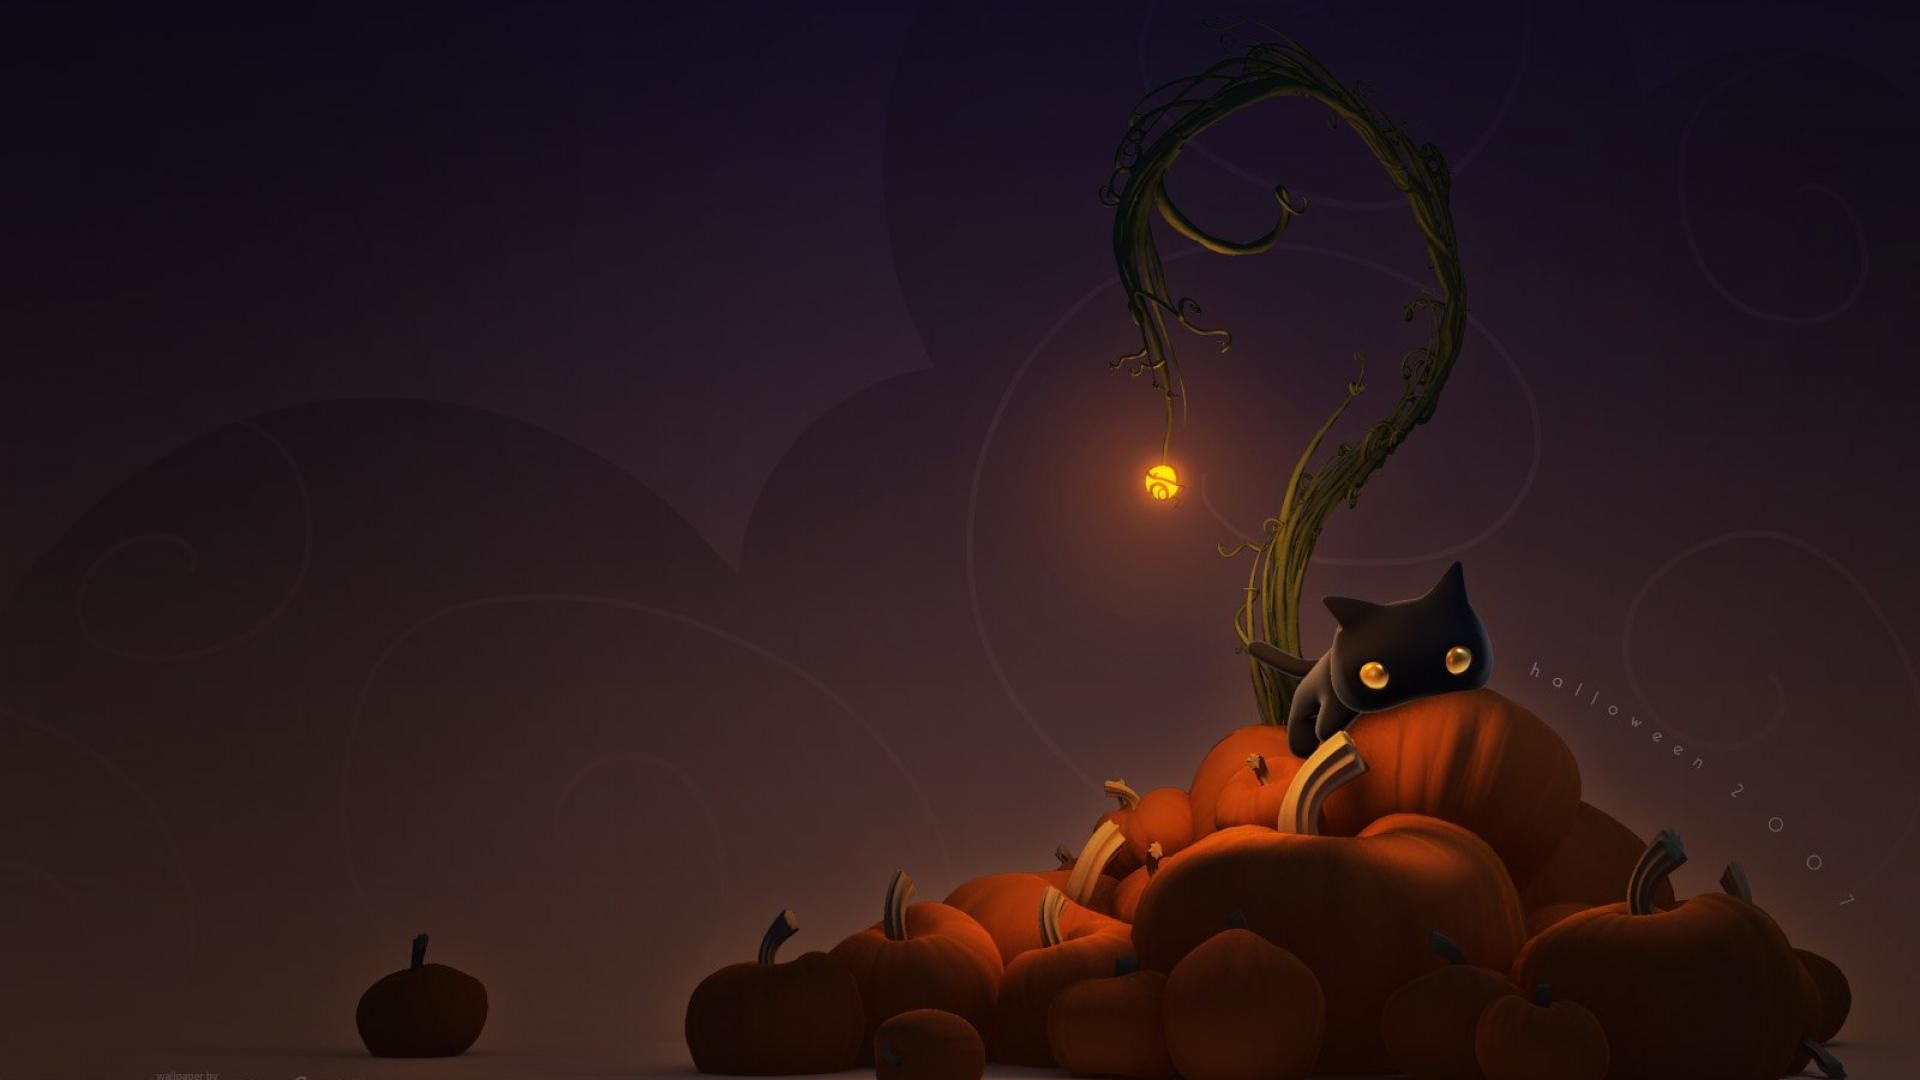 1920x1080 Scary Halloween Black Cat | The Horror Blog of a Dead Dreamer .